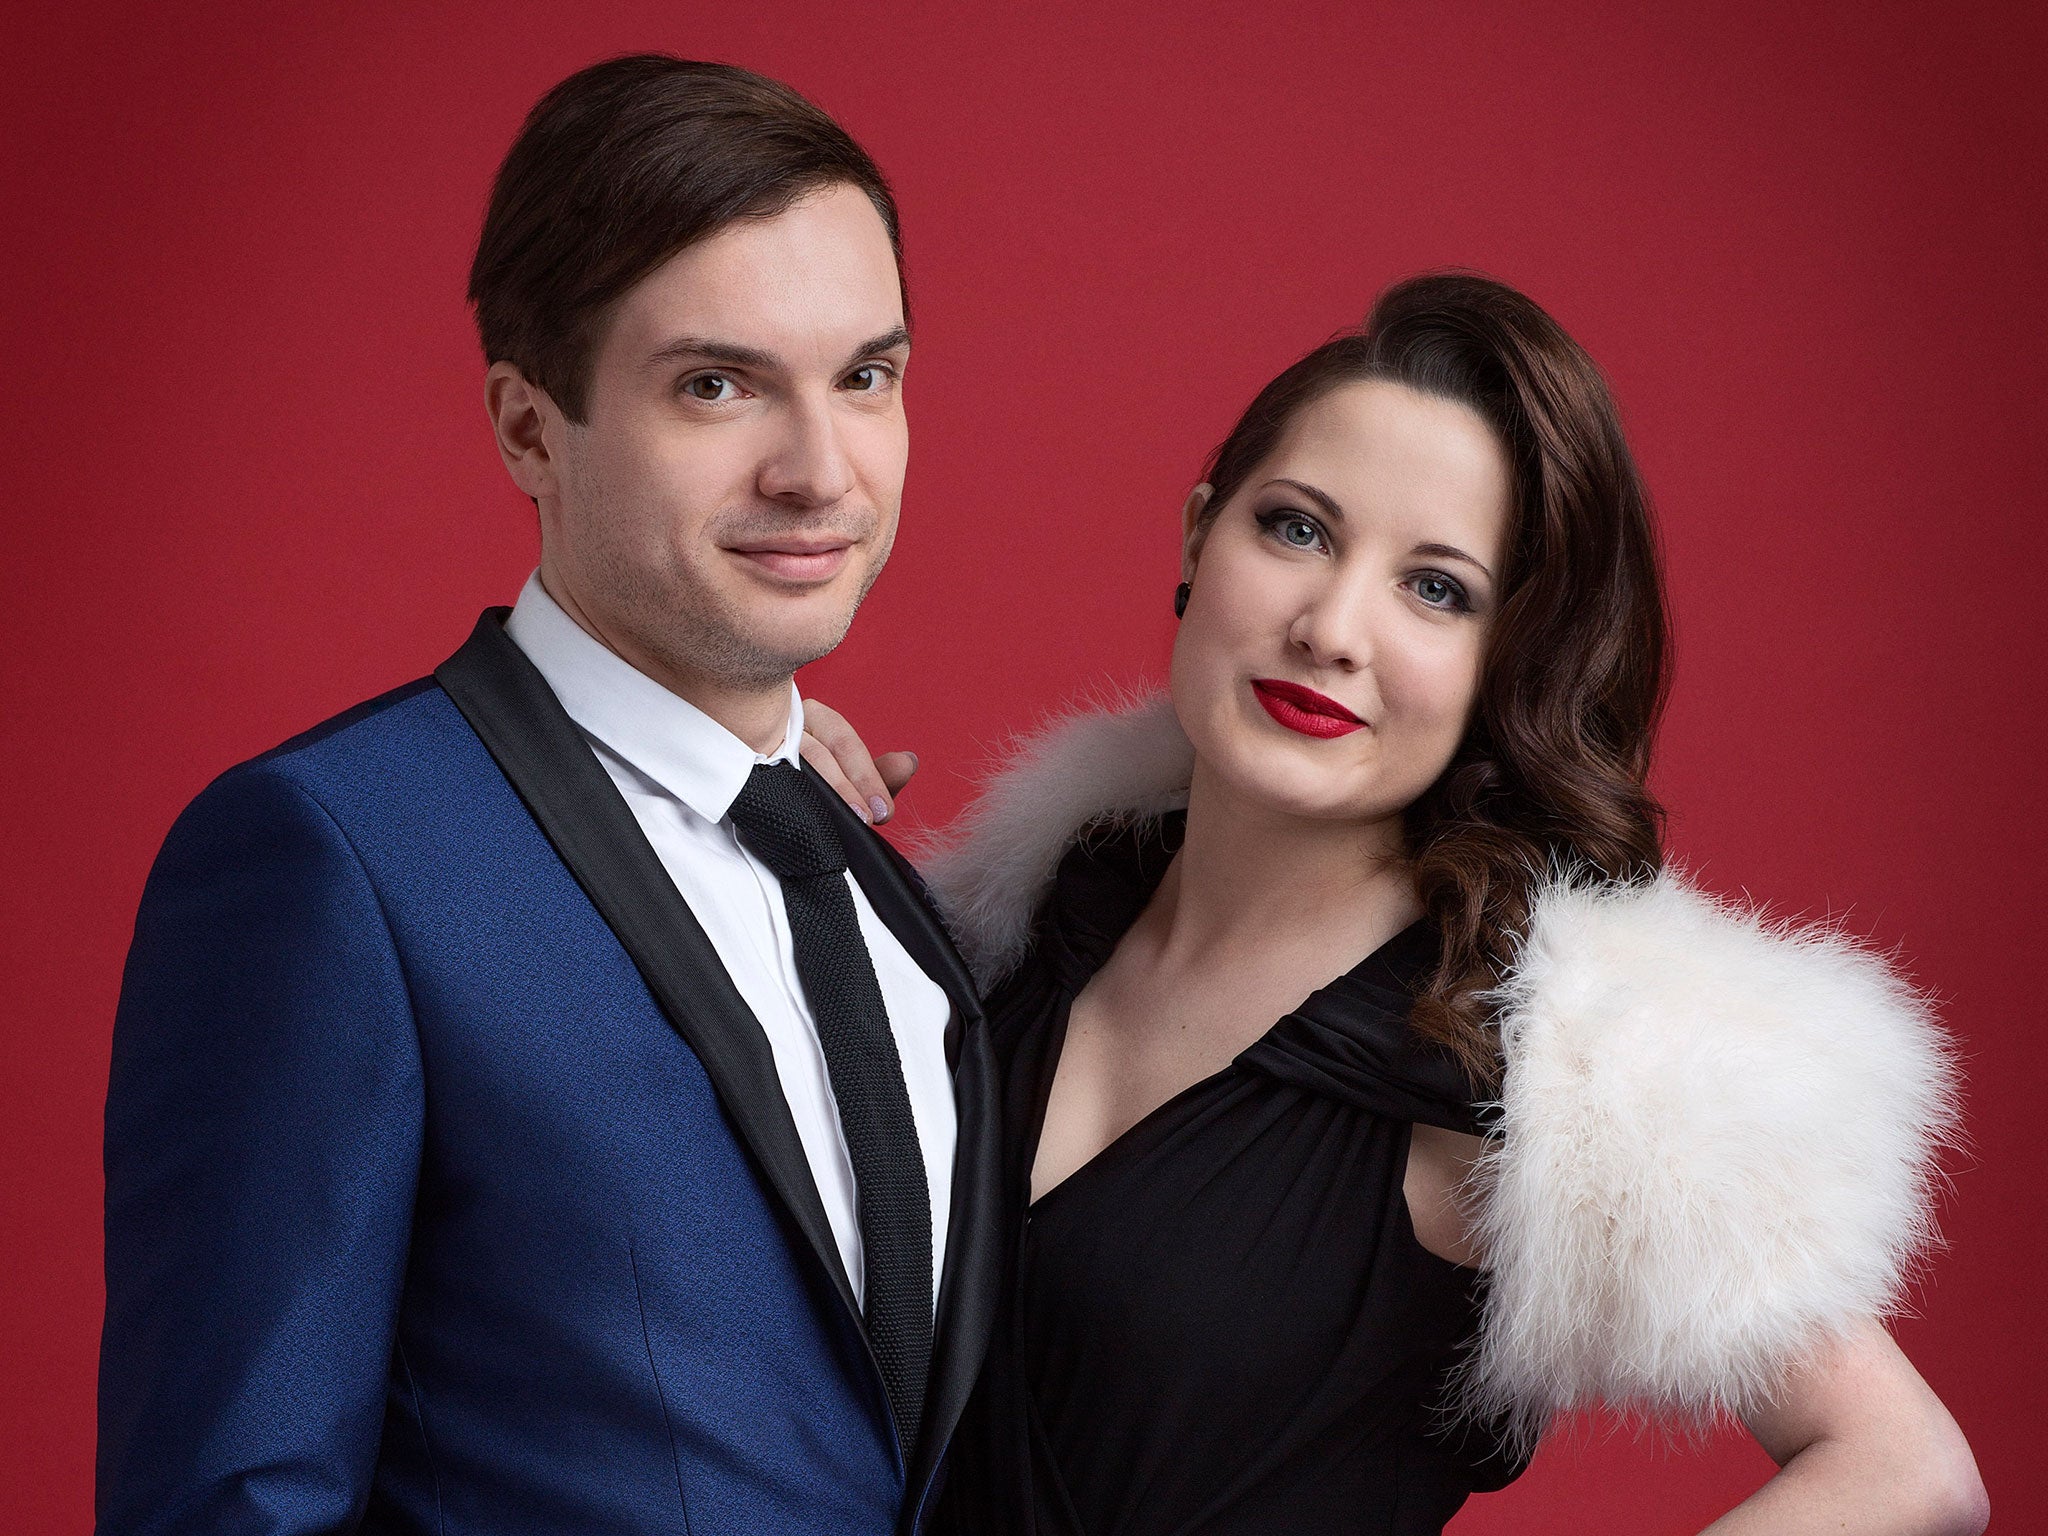 Alex Larke and Bianca Nicholas of Electro Velvet, the UK’s entrants for this year’s Eurovision contest